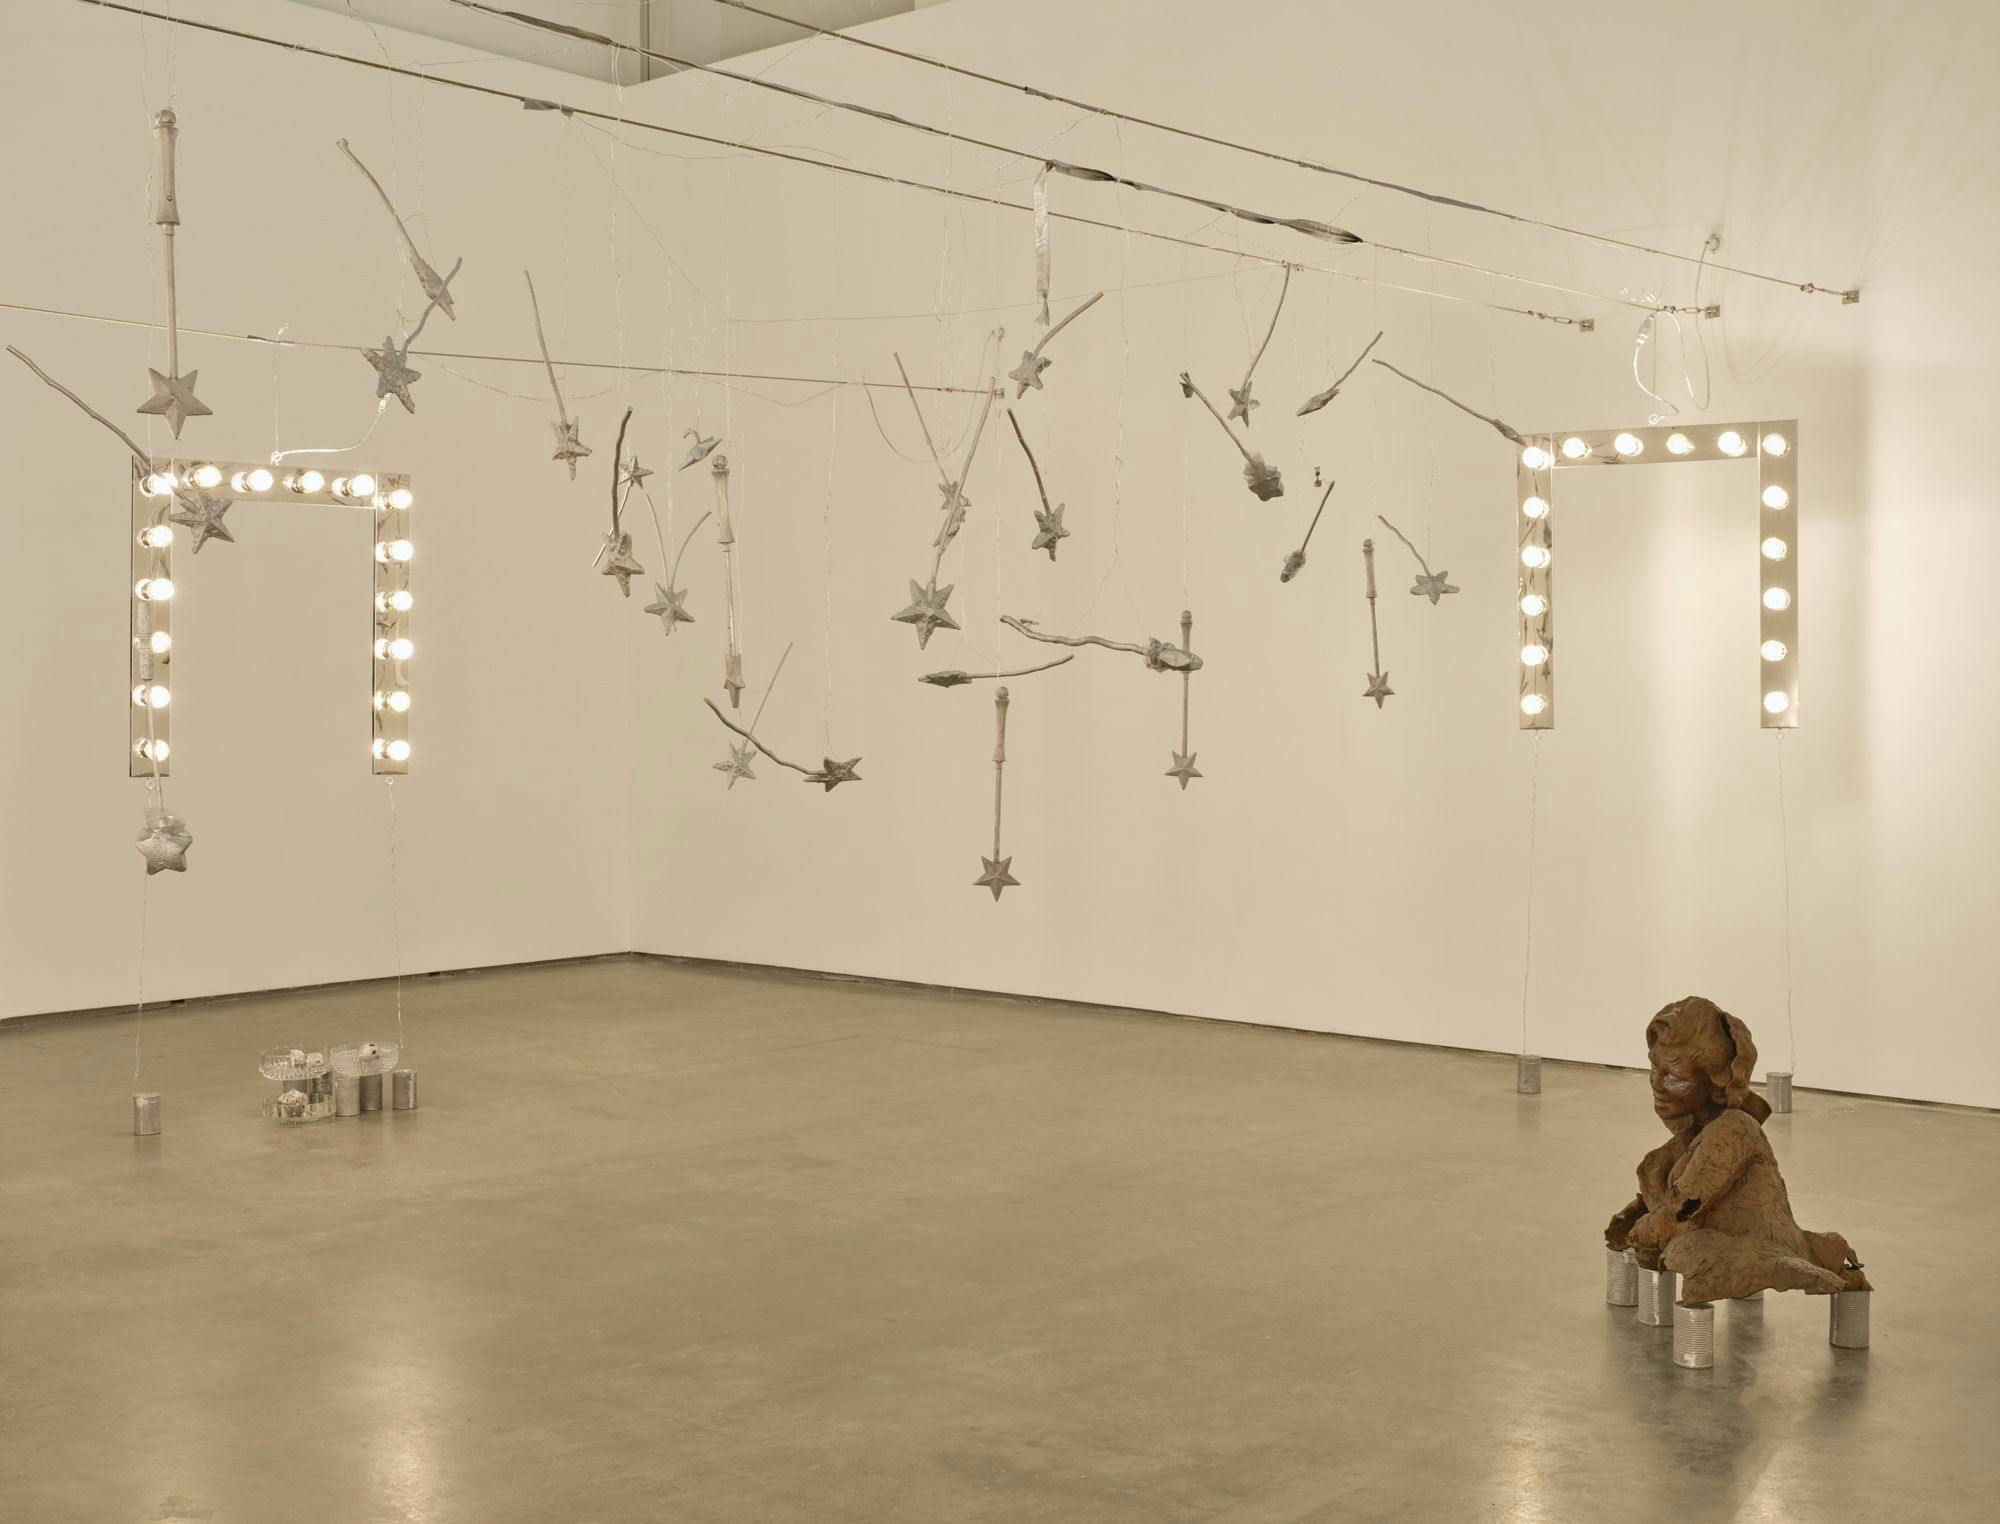 A wide view of vanity lights and silver magic wands hanging from wire. A bronze sulpture of a partial human figure sits on aluminum cans.